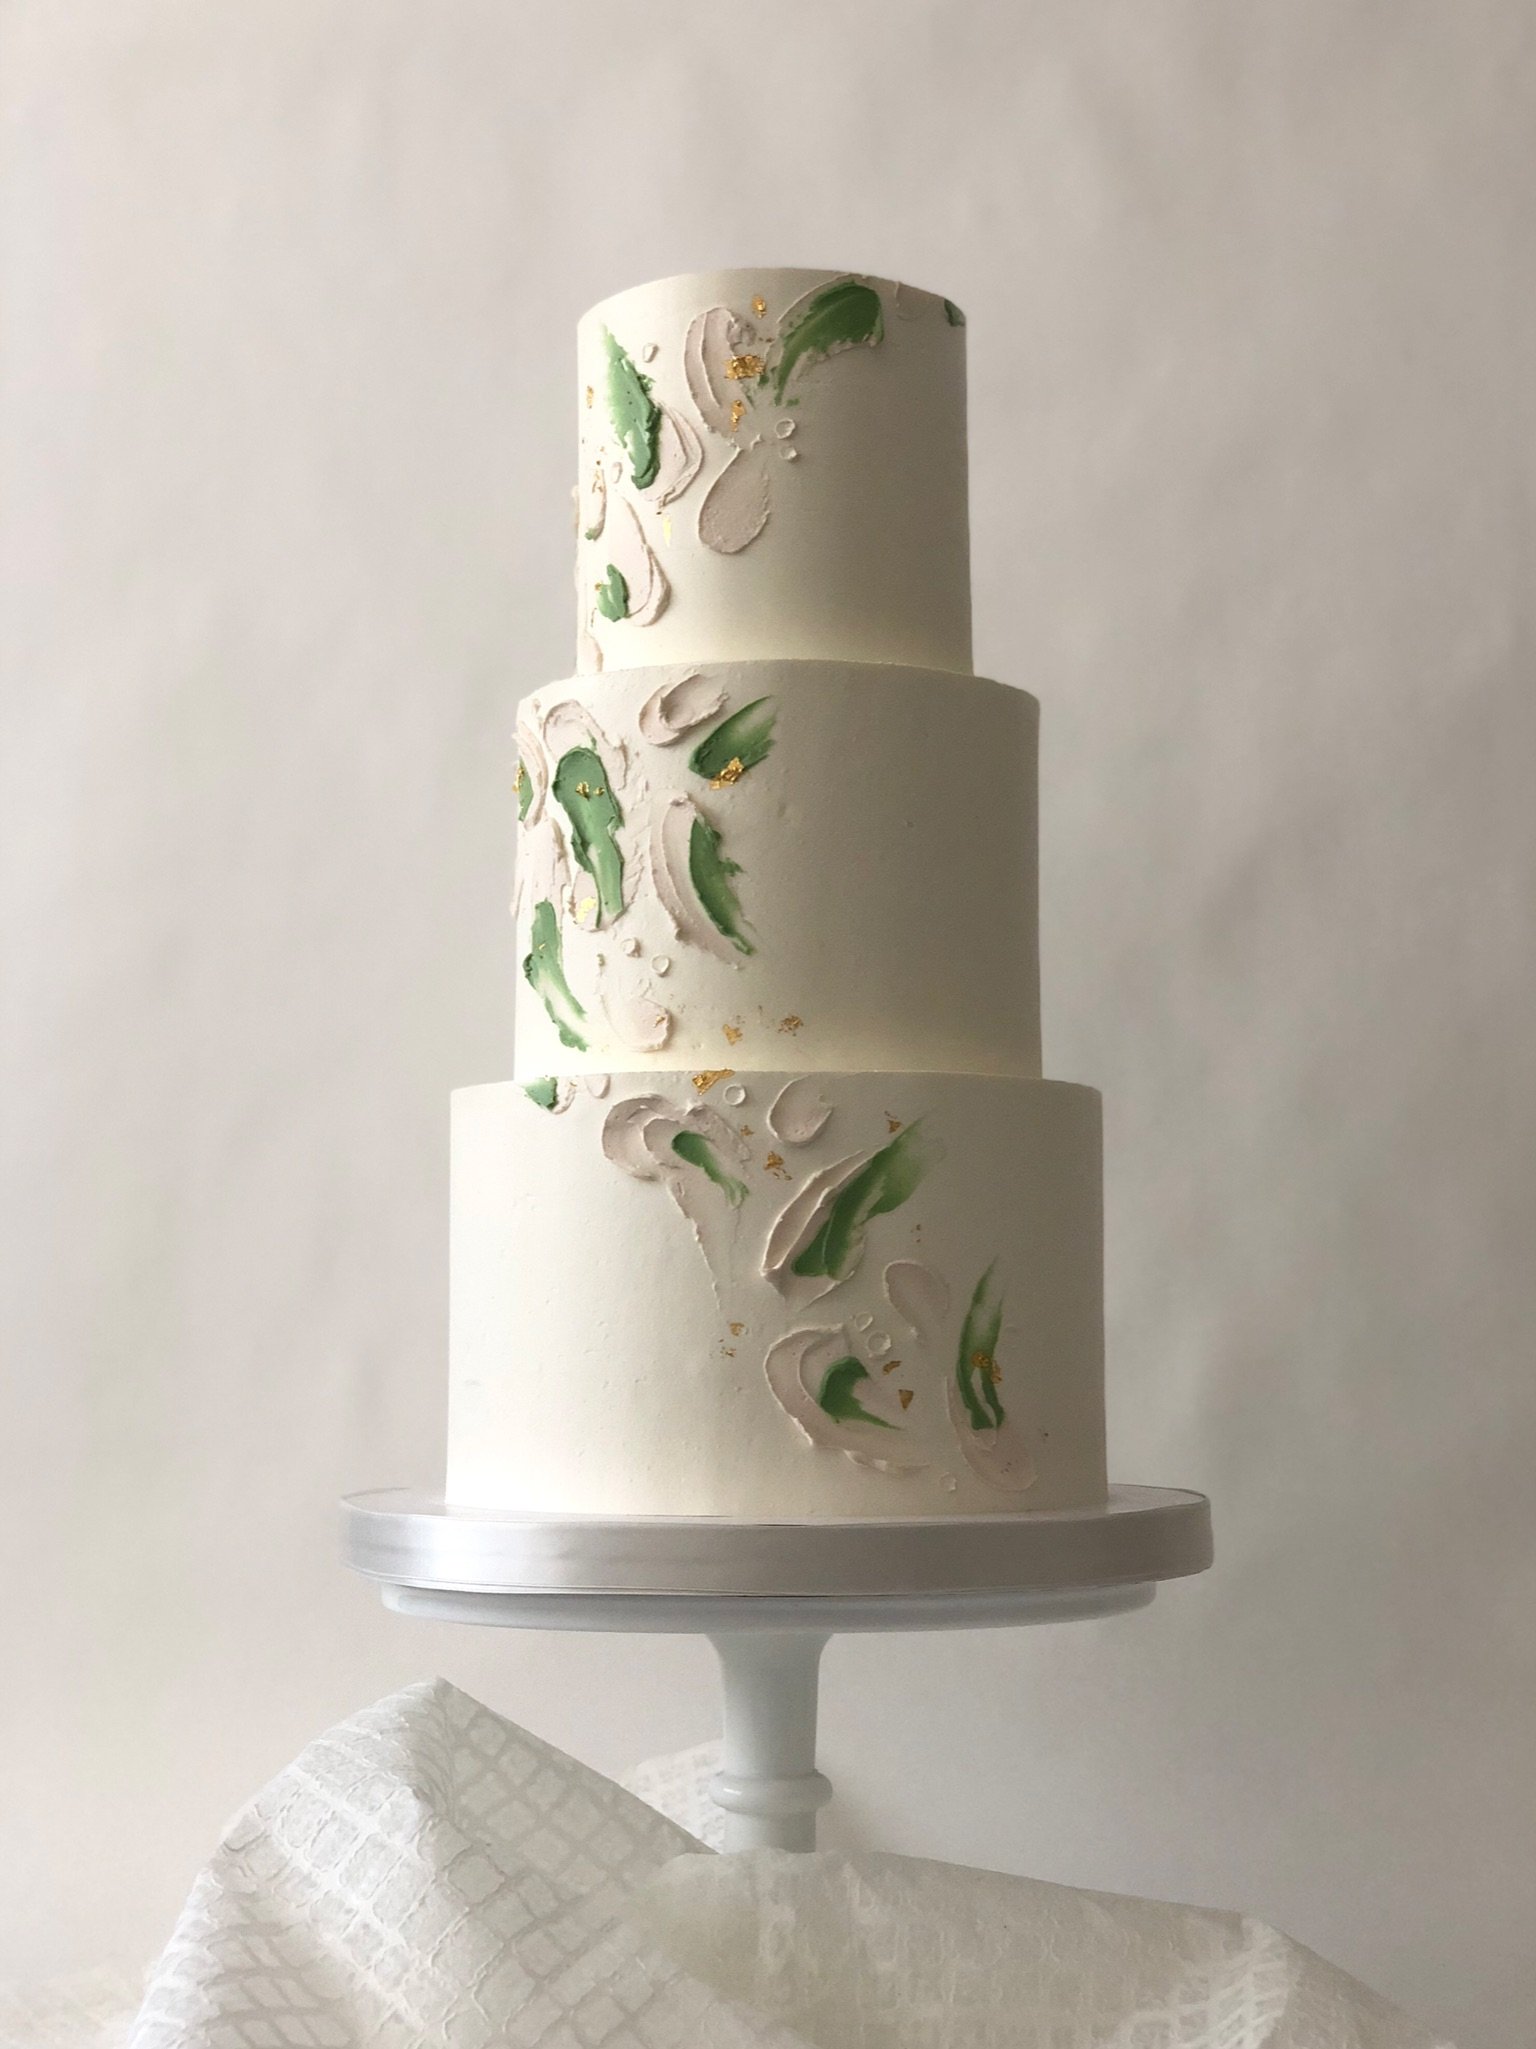 3-Tier Cake with paint design